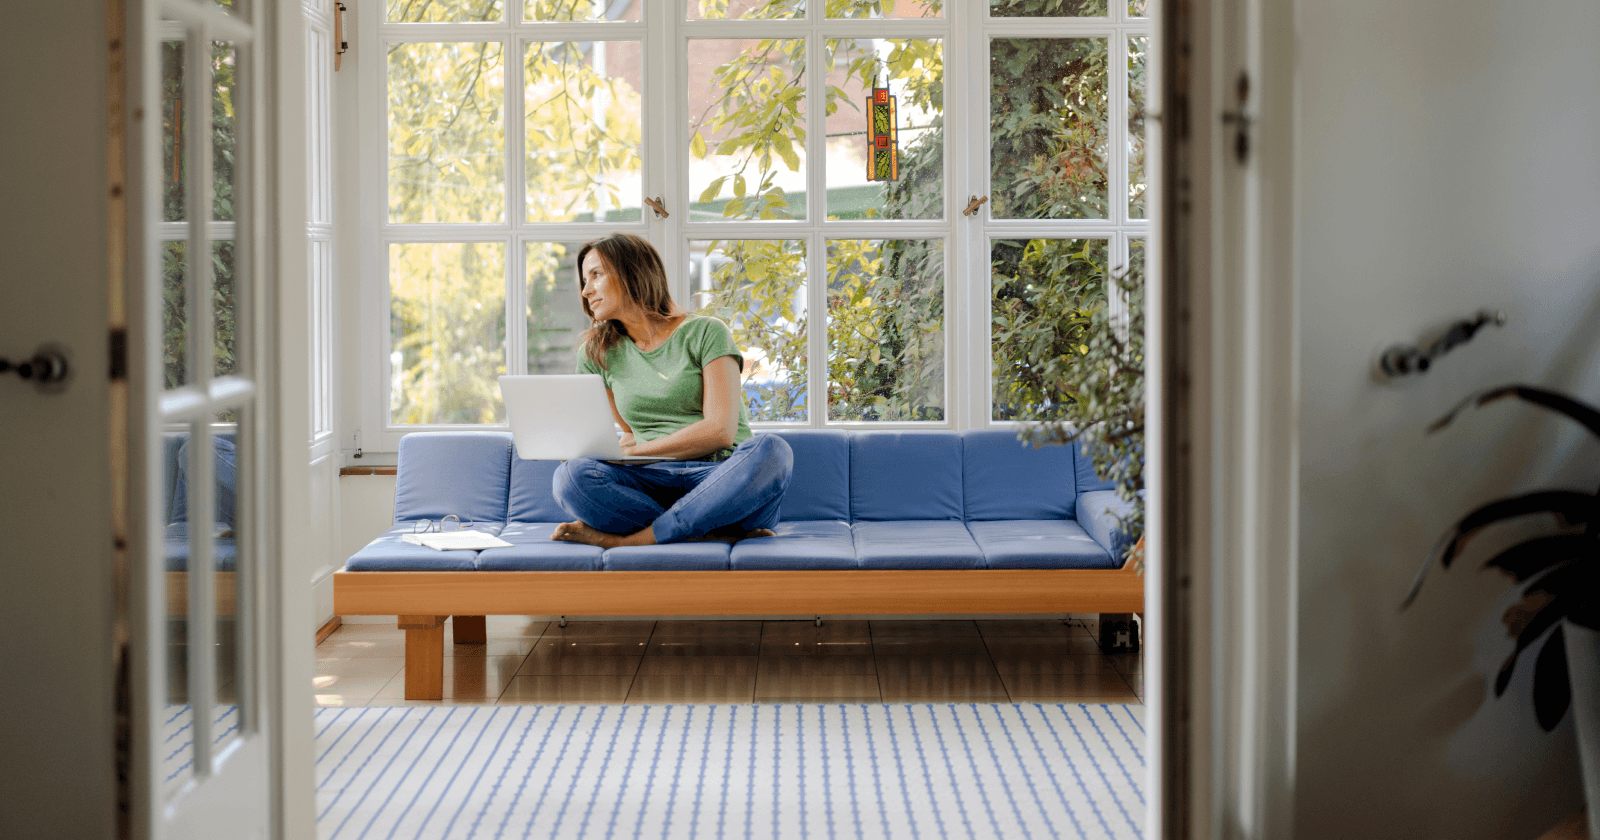 Person Sitting in Sunroom on Laptop